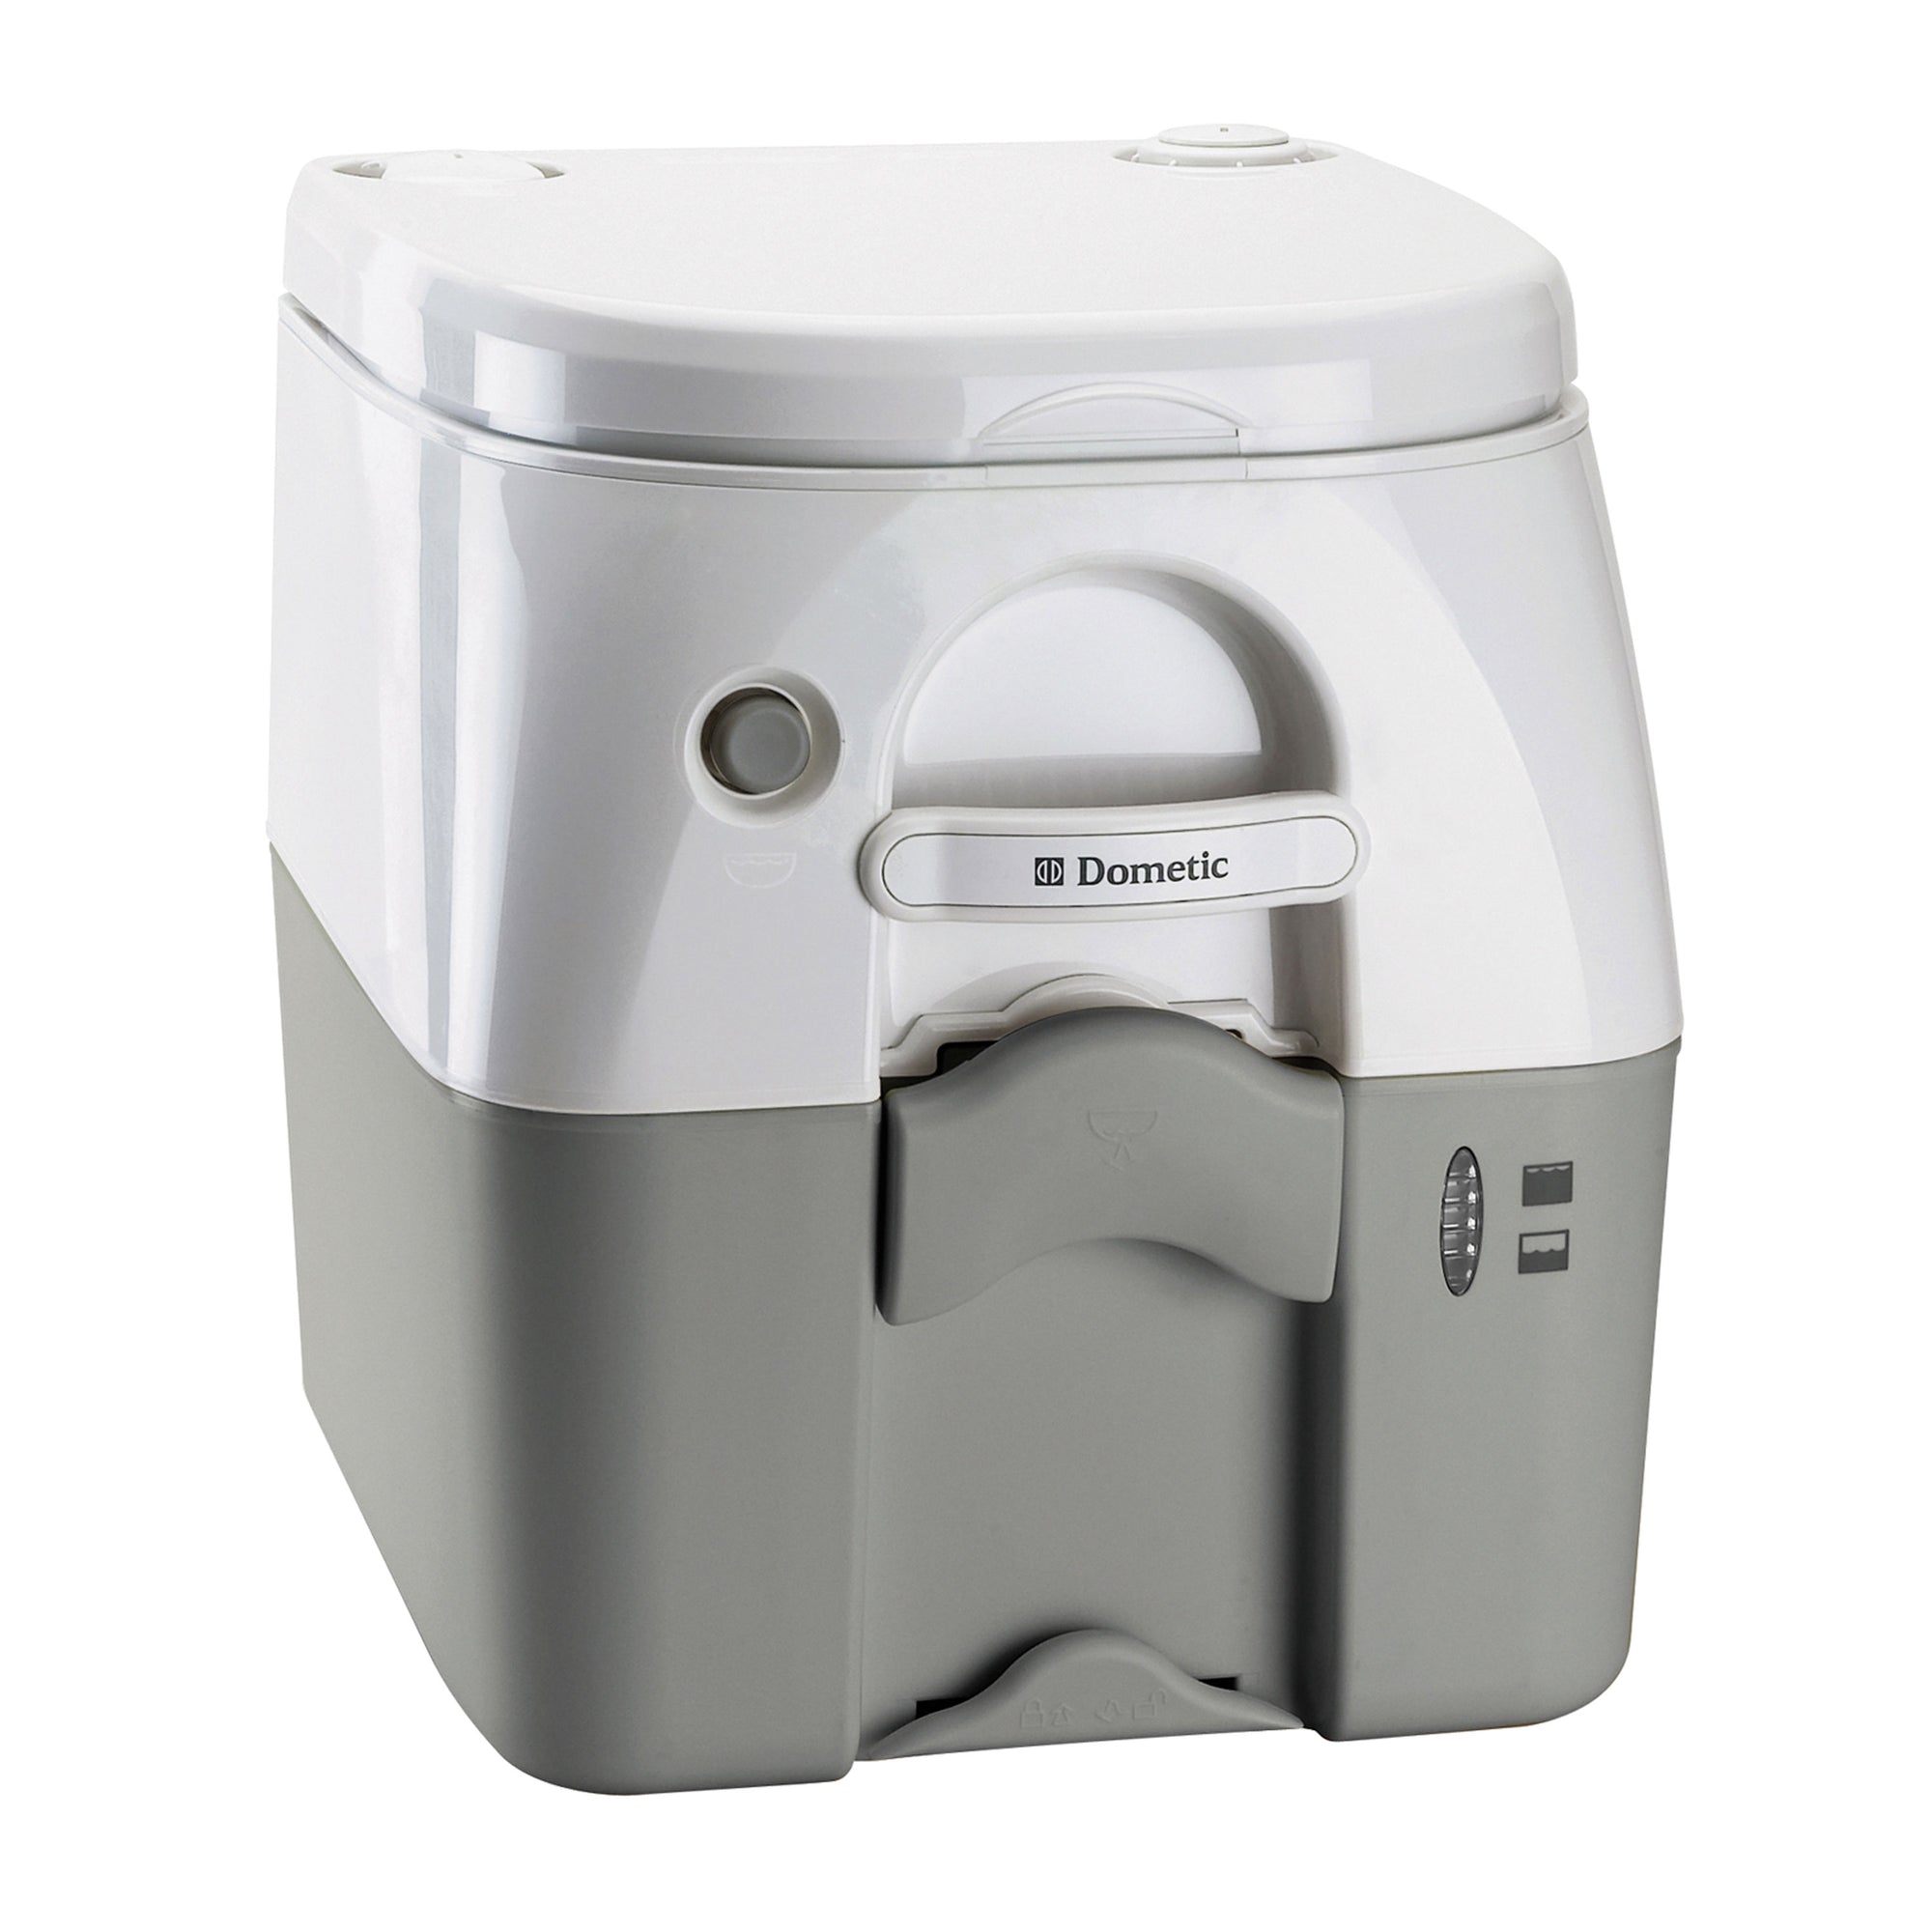 Dometic 301097506 970 Series Portable Toilet - 5.0 Gallon, Gray with Stainless Steel Hold-Down Brackets